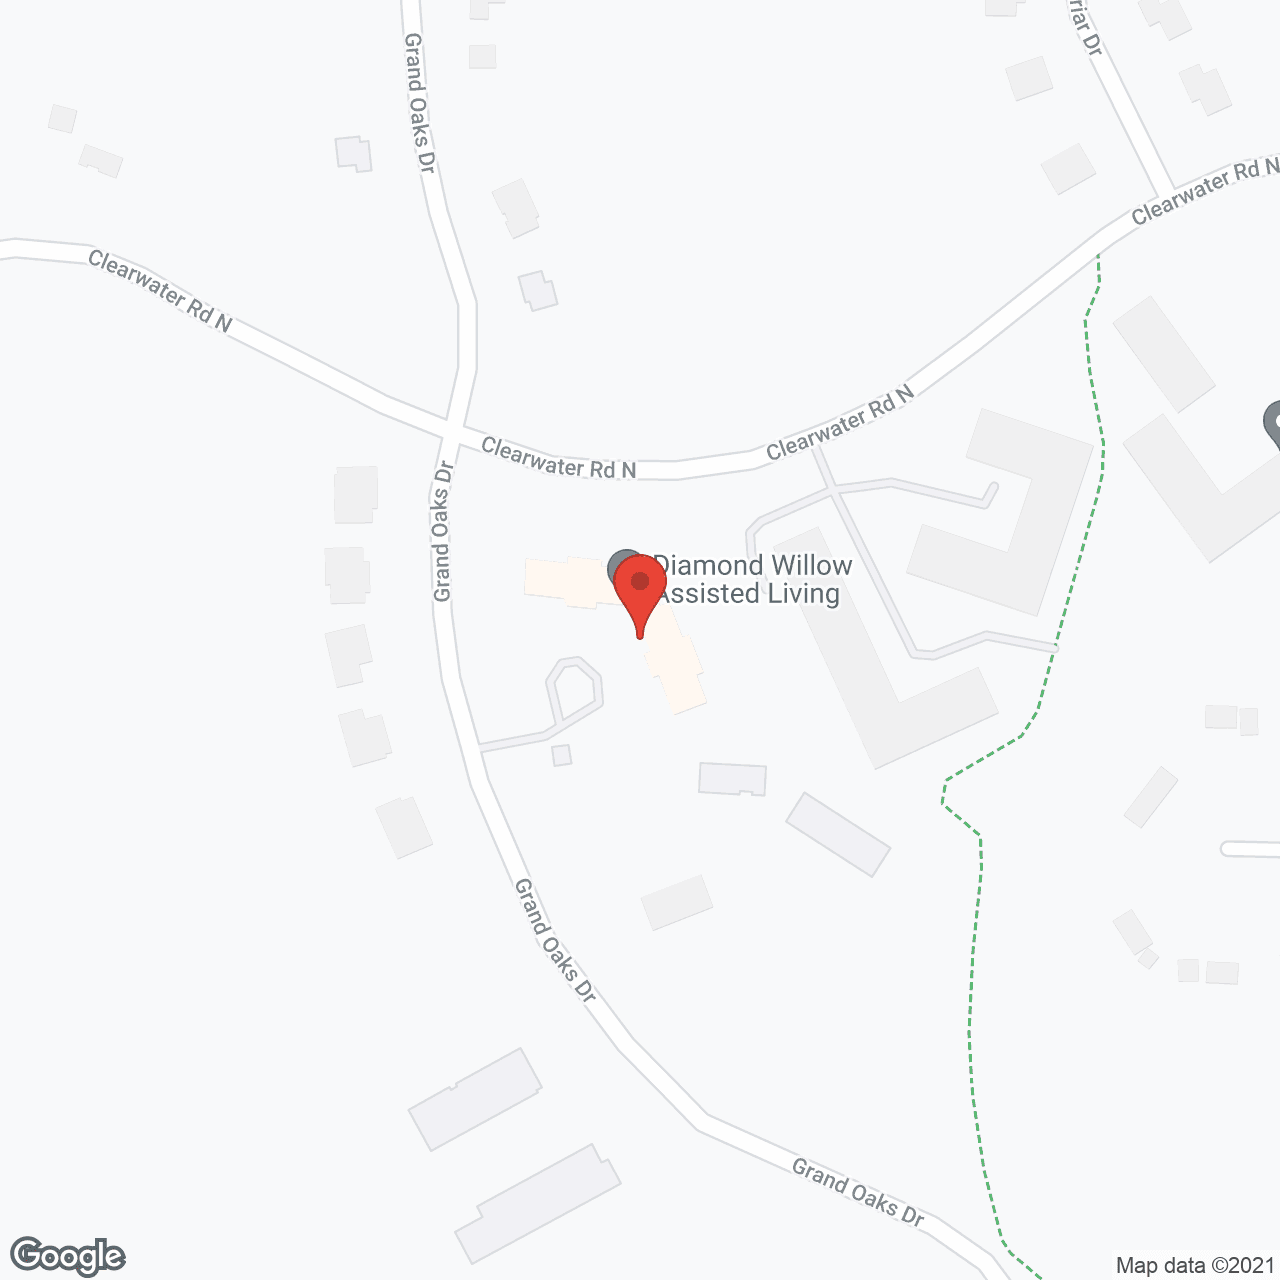 Diamond Willow Assisted Living of Baxter in google map